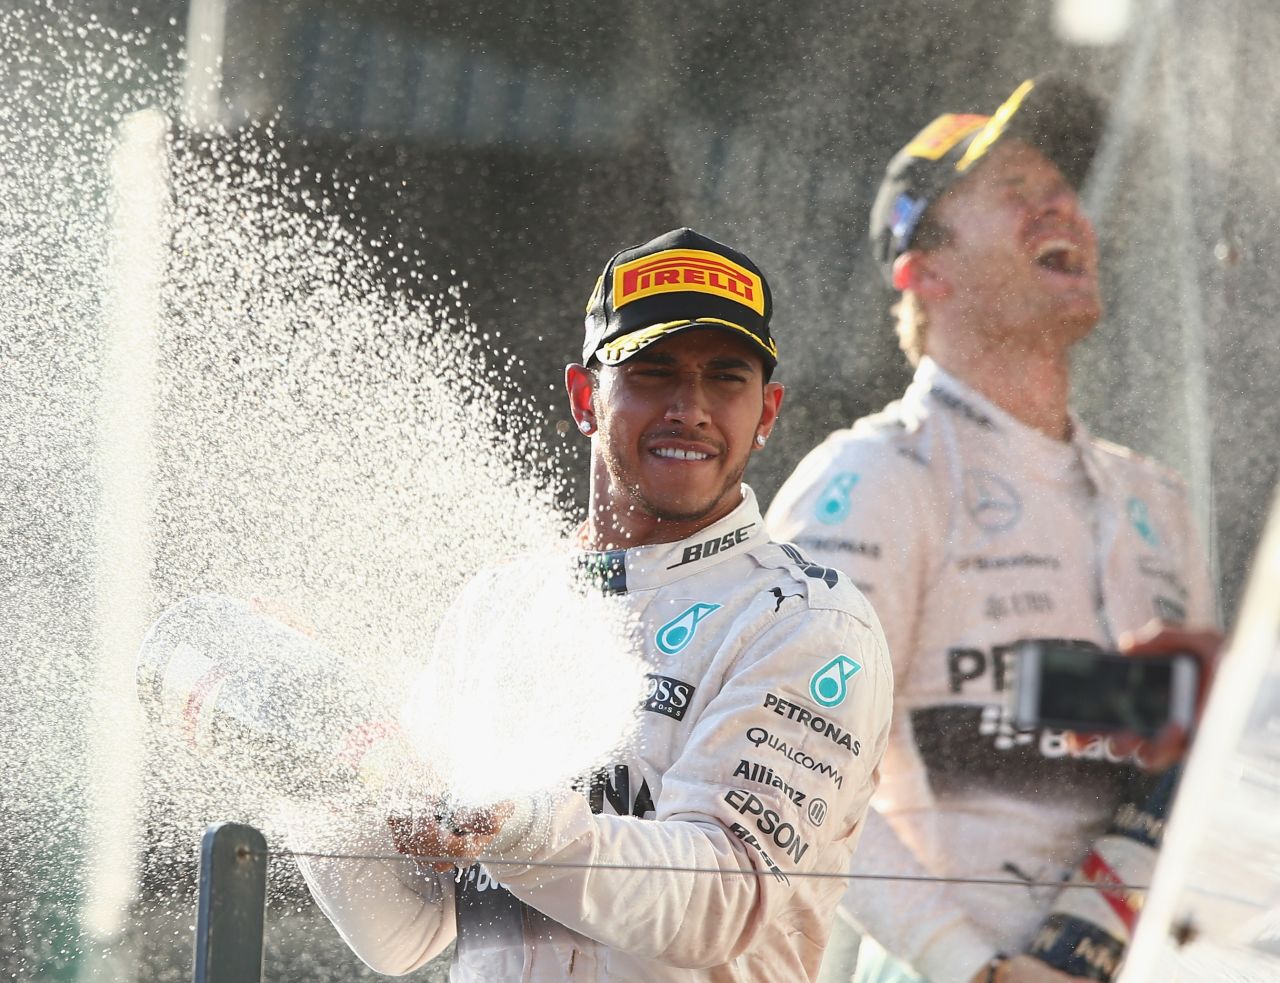 The 2014 champion got his world title defense off to a winning start with success at the season-opening Australian Grand Prix in Melbourne in March. Hamilton and Mercedes teammate Nico Rosberg dominated, with the Briton controlling the race on the Albert Park street circuit and ultimately seeing off the German.